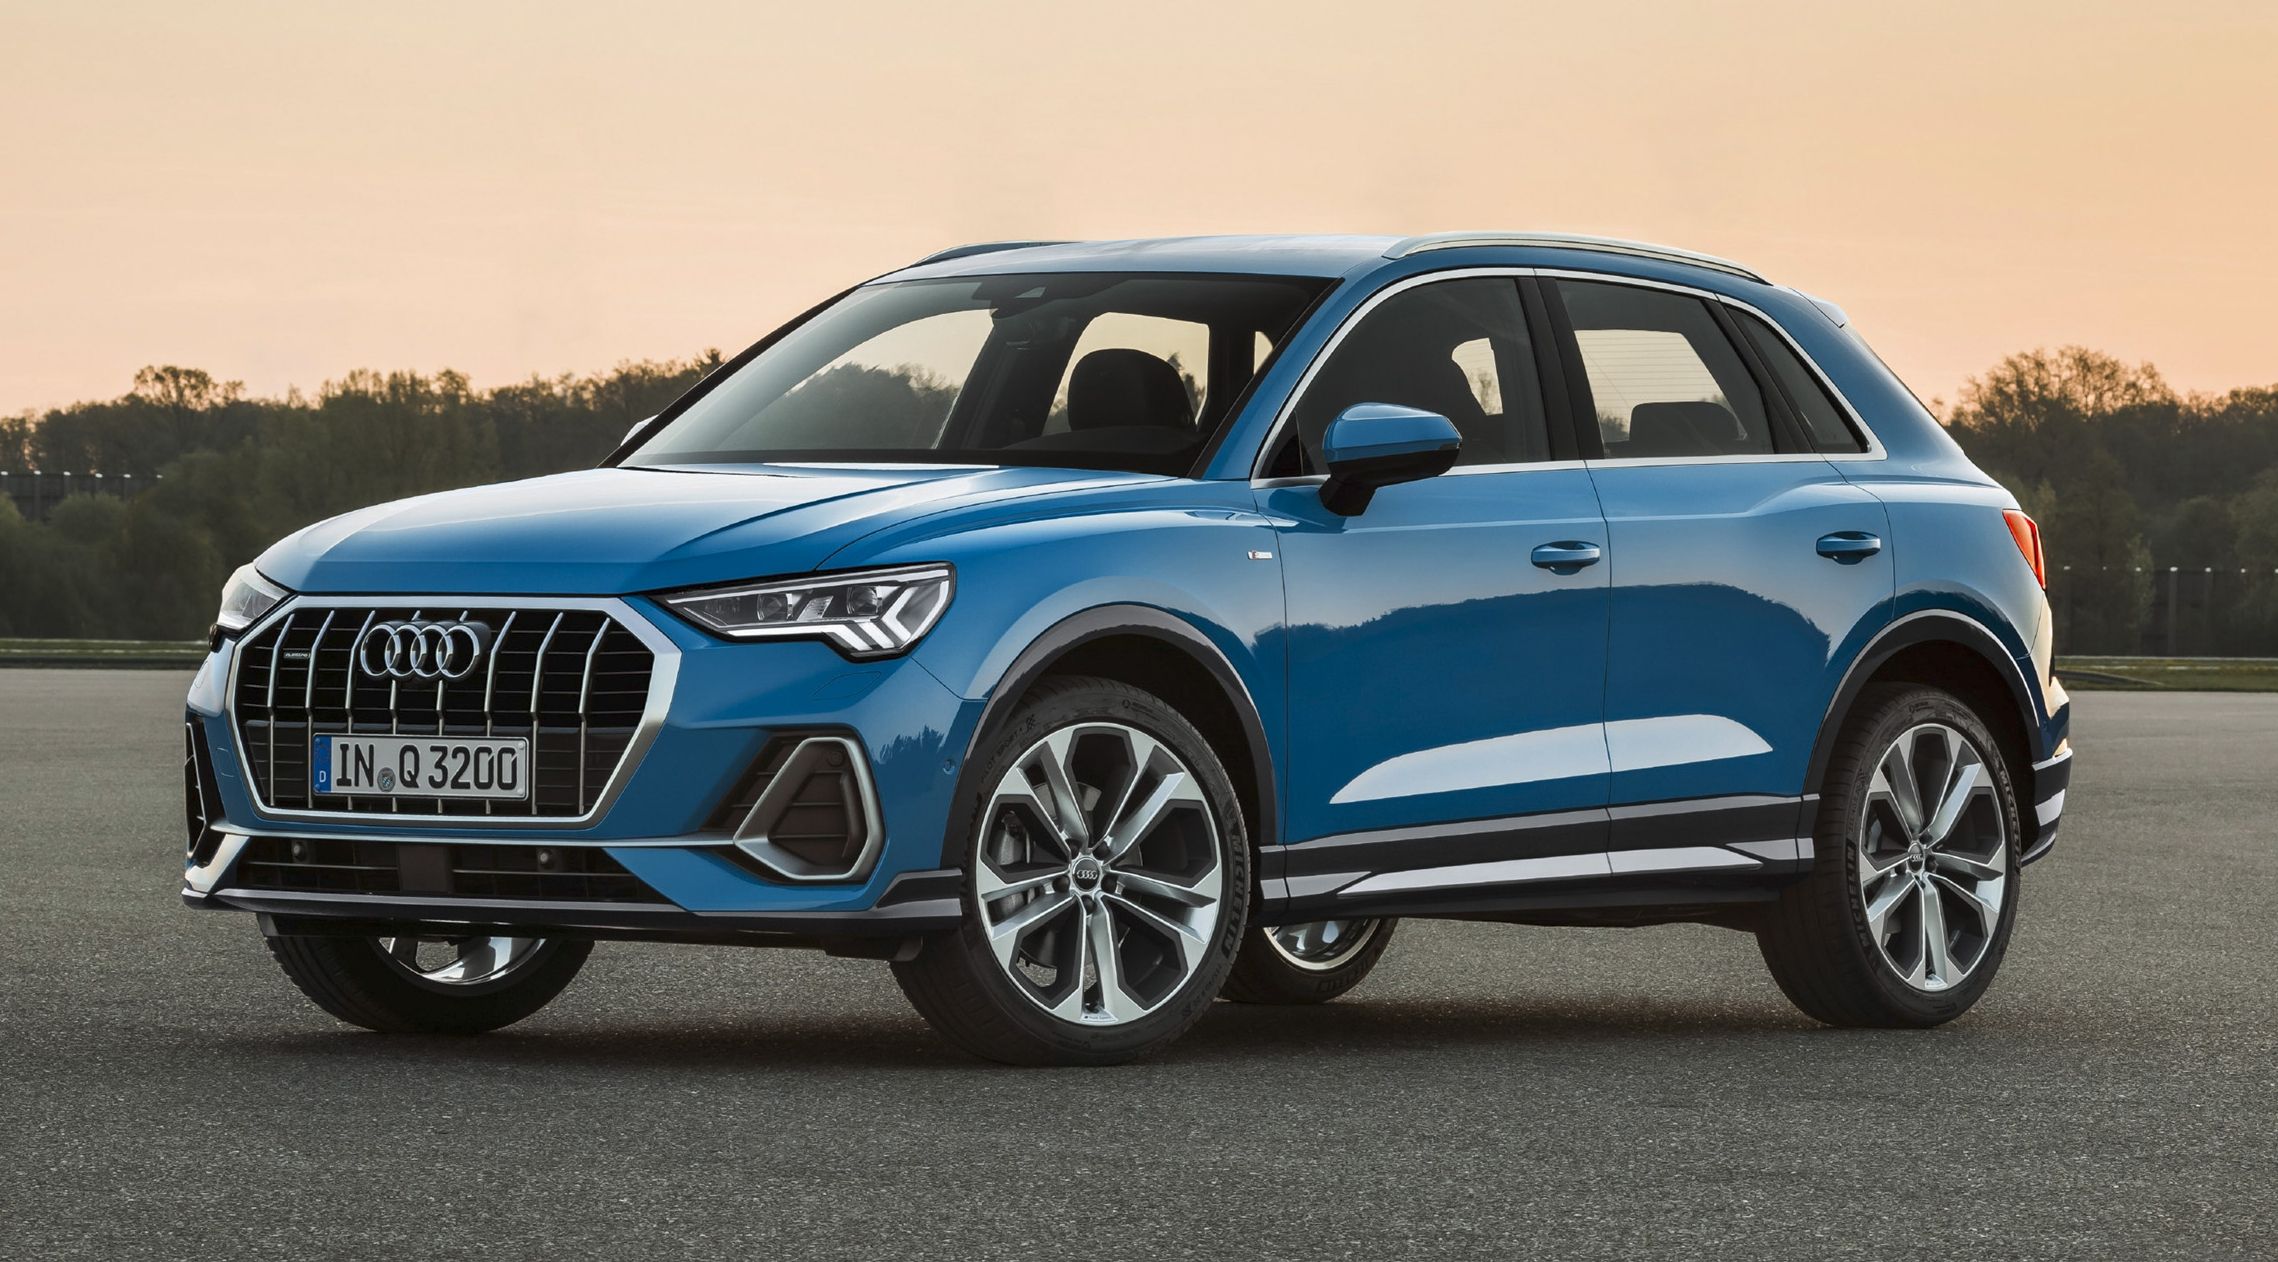 2022 Small 2019 SUVs Ranked From Worst to Best